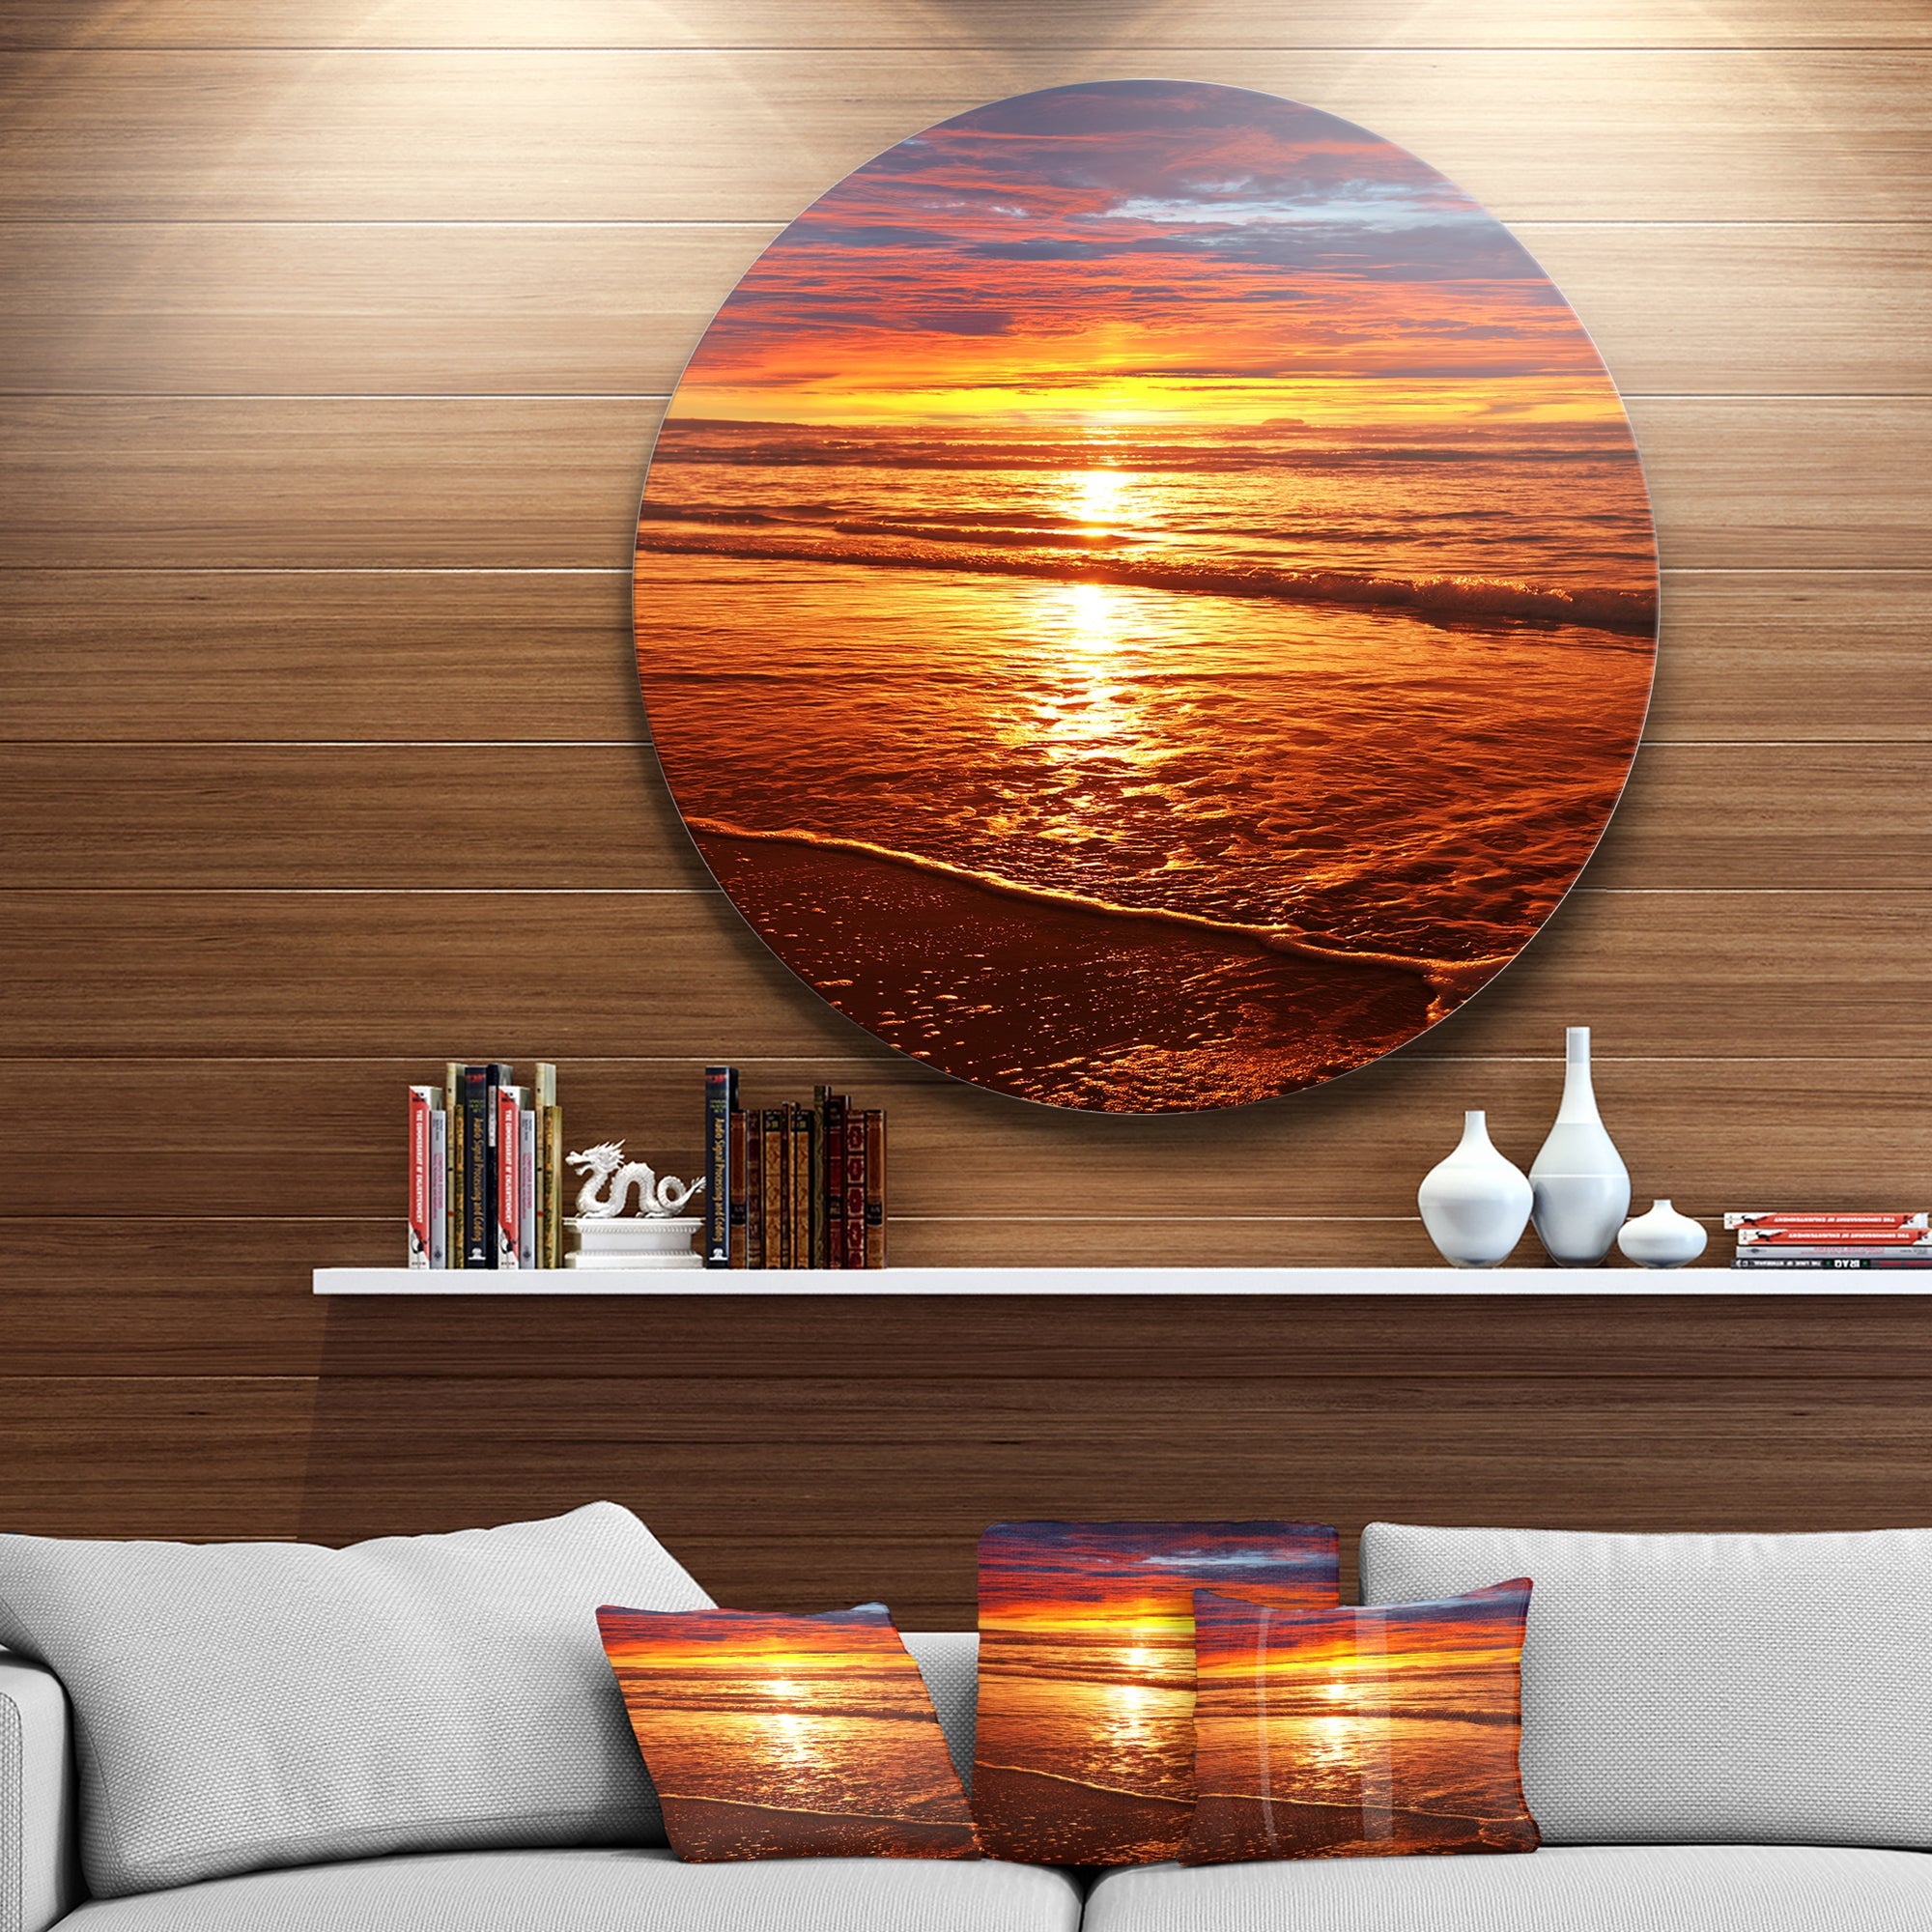 Colorful Sunset Mirrored in Waters Beach Metal Circle Wall Art